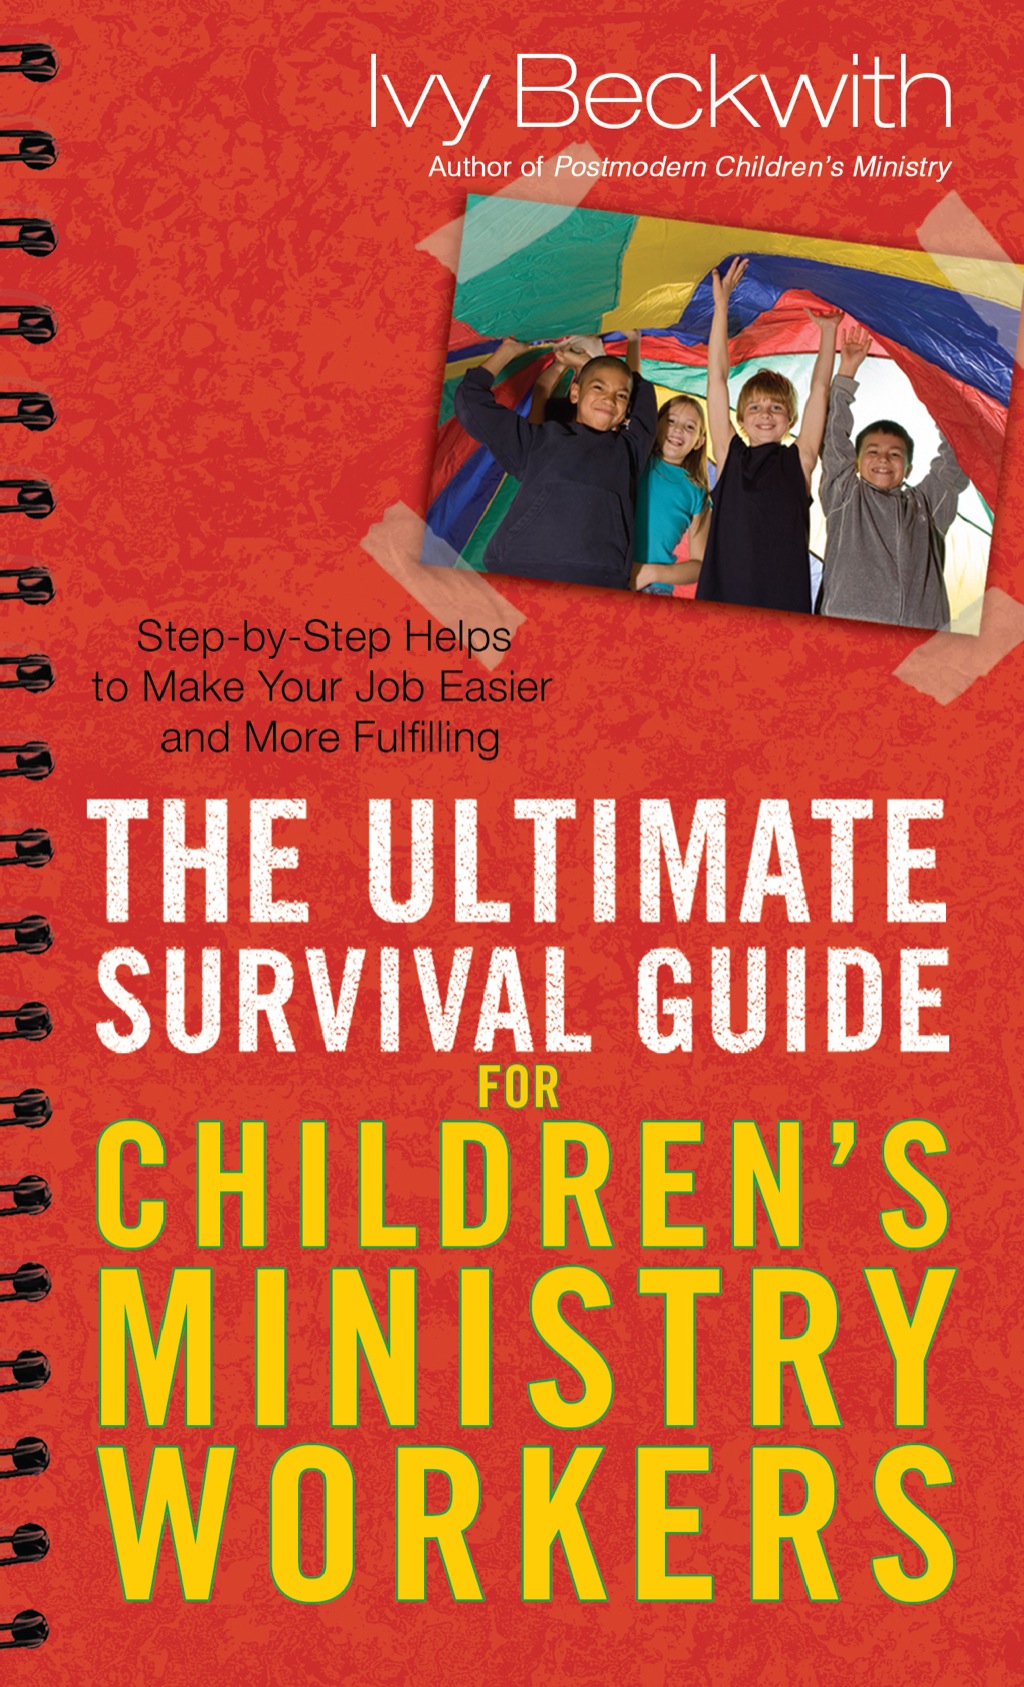 The Ultimate Survival Guide for Children's Ministry Workers (eBook) - Ivy Beckwith,